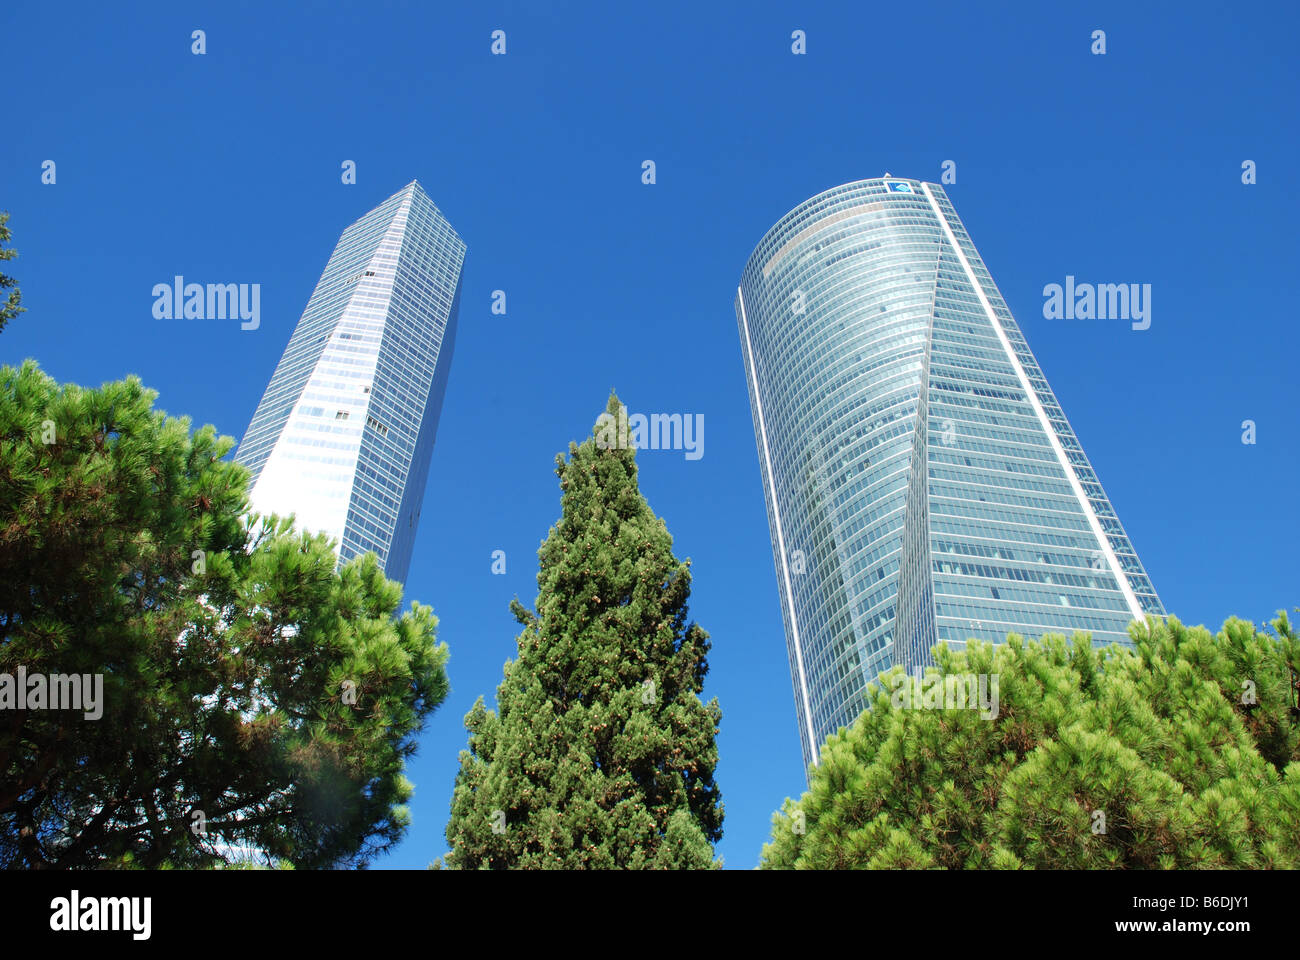 Tower Cristal and Tower Espacio viewed from below. Madrid. Spain. Stock Photo